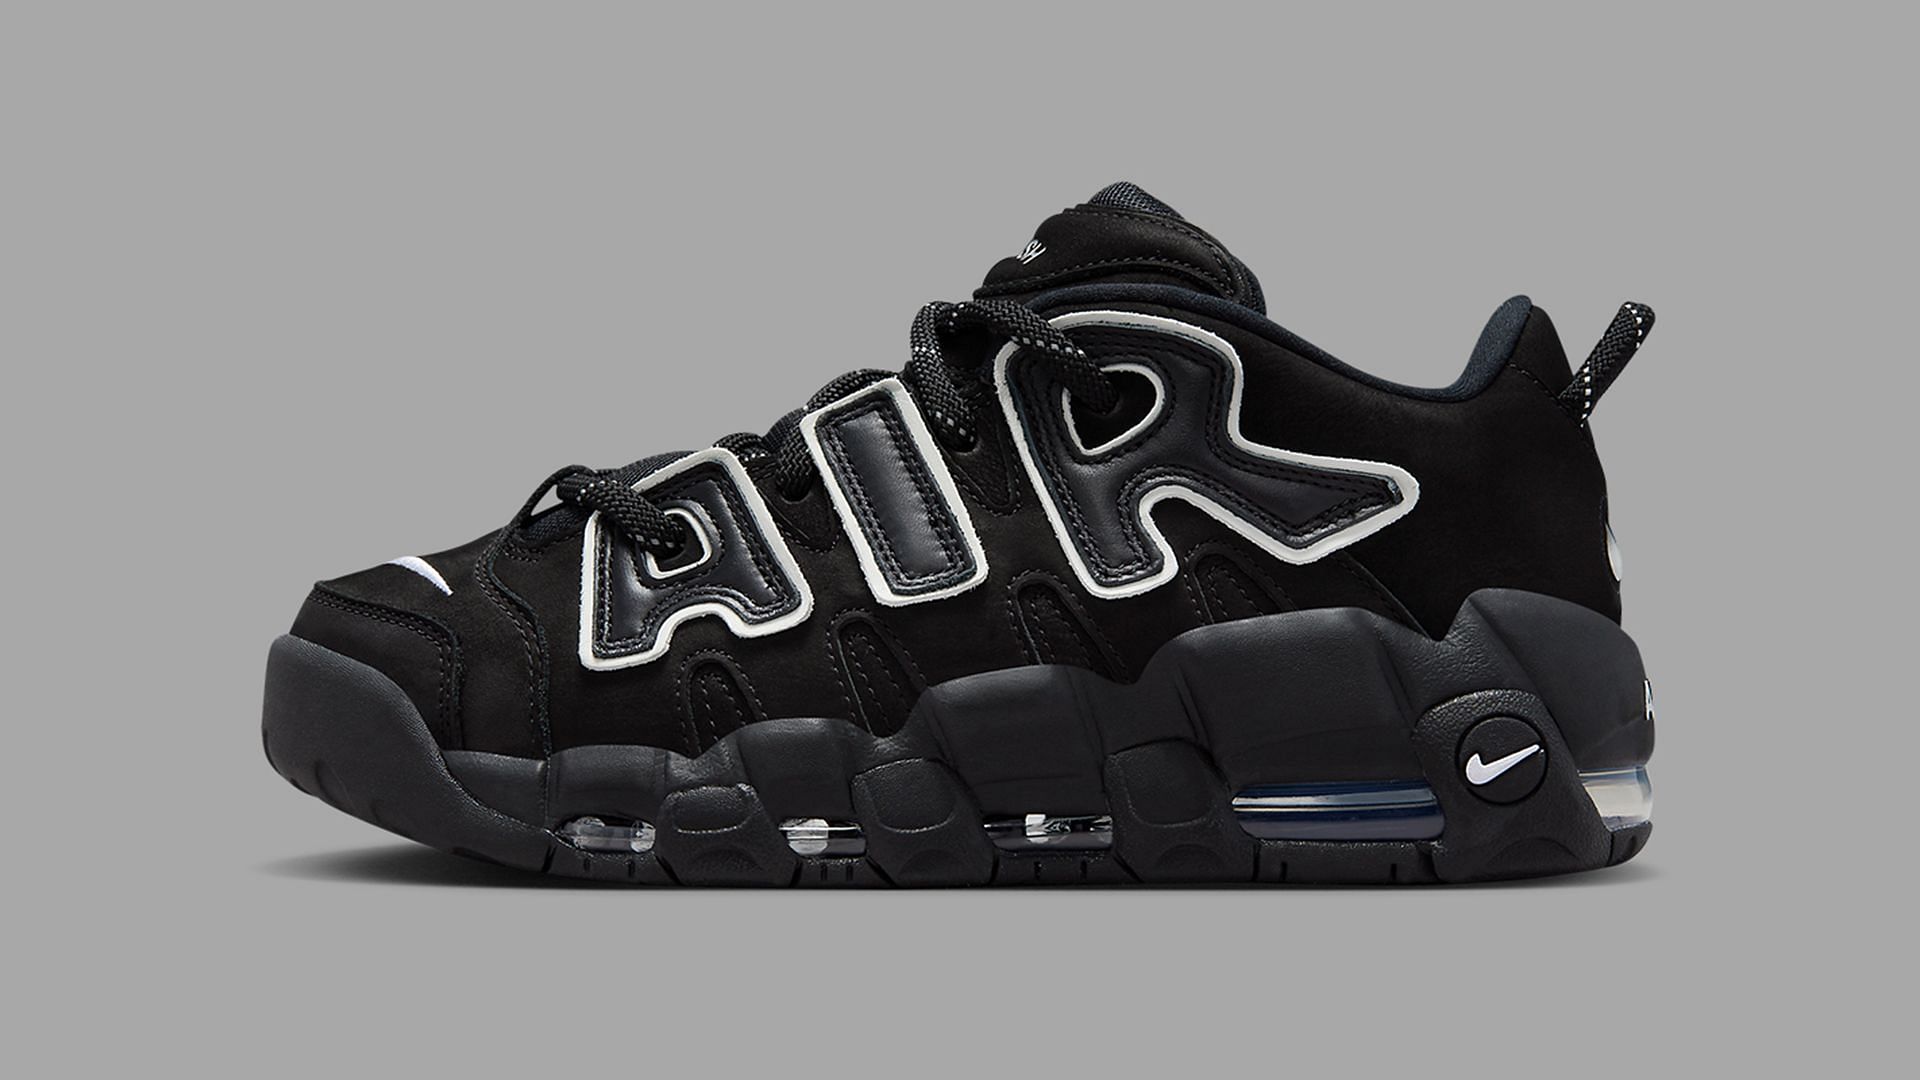 AMBUSH x Nike Air More Uptempo Low “Black/White” sneakers: Where to get ...